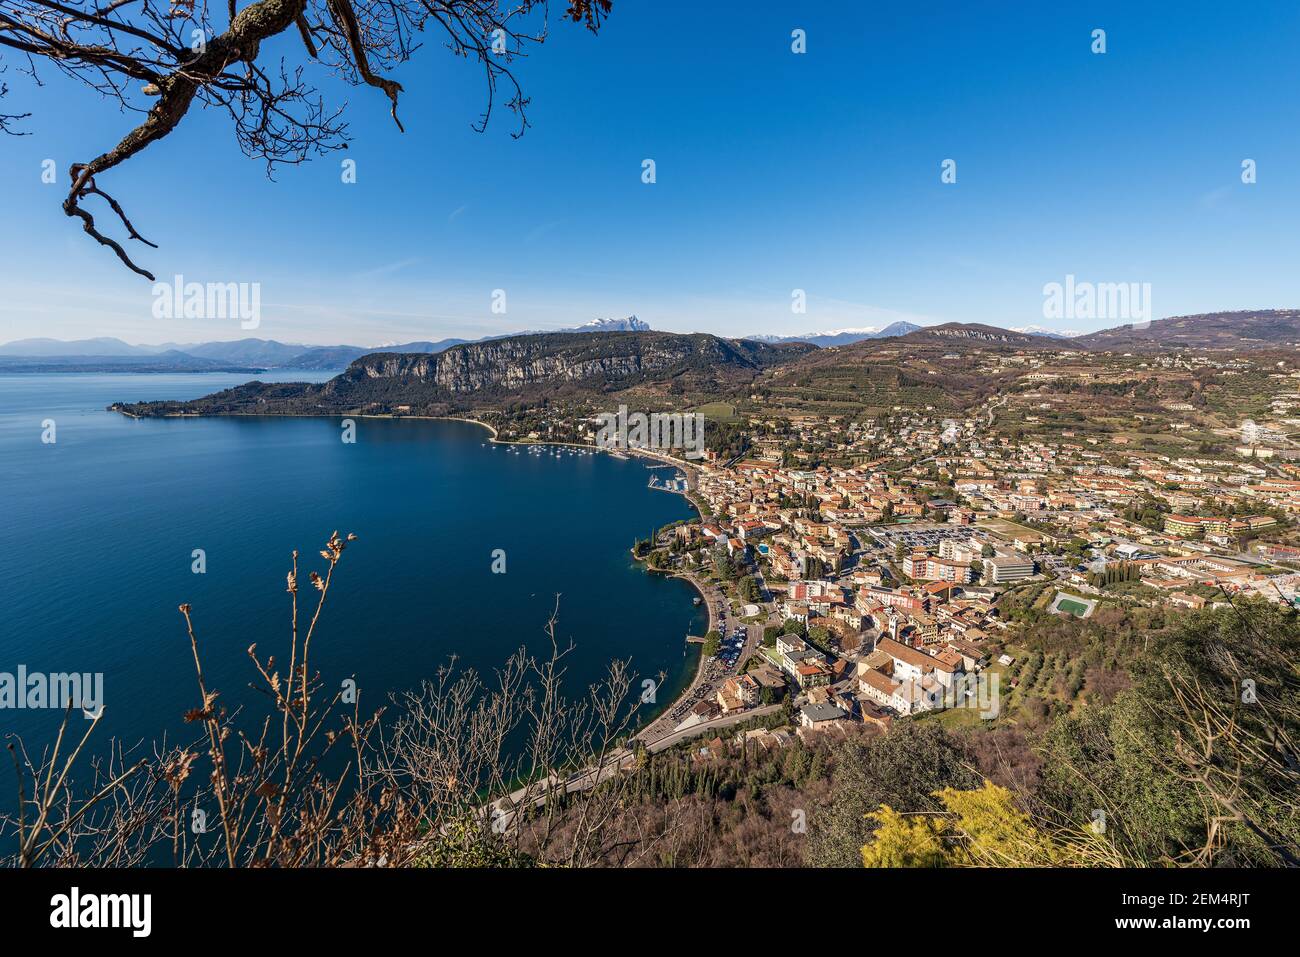 Aerial View of the Small Garda Town, tourist resort on the coast of Lake Garda, view from the Rocca di Garda, small hill overlooking the lake. Italy. Stock Photo